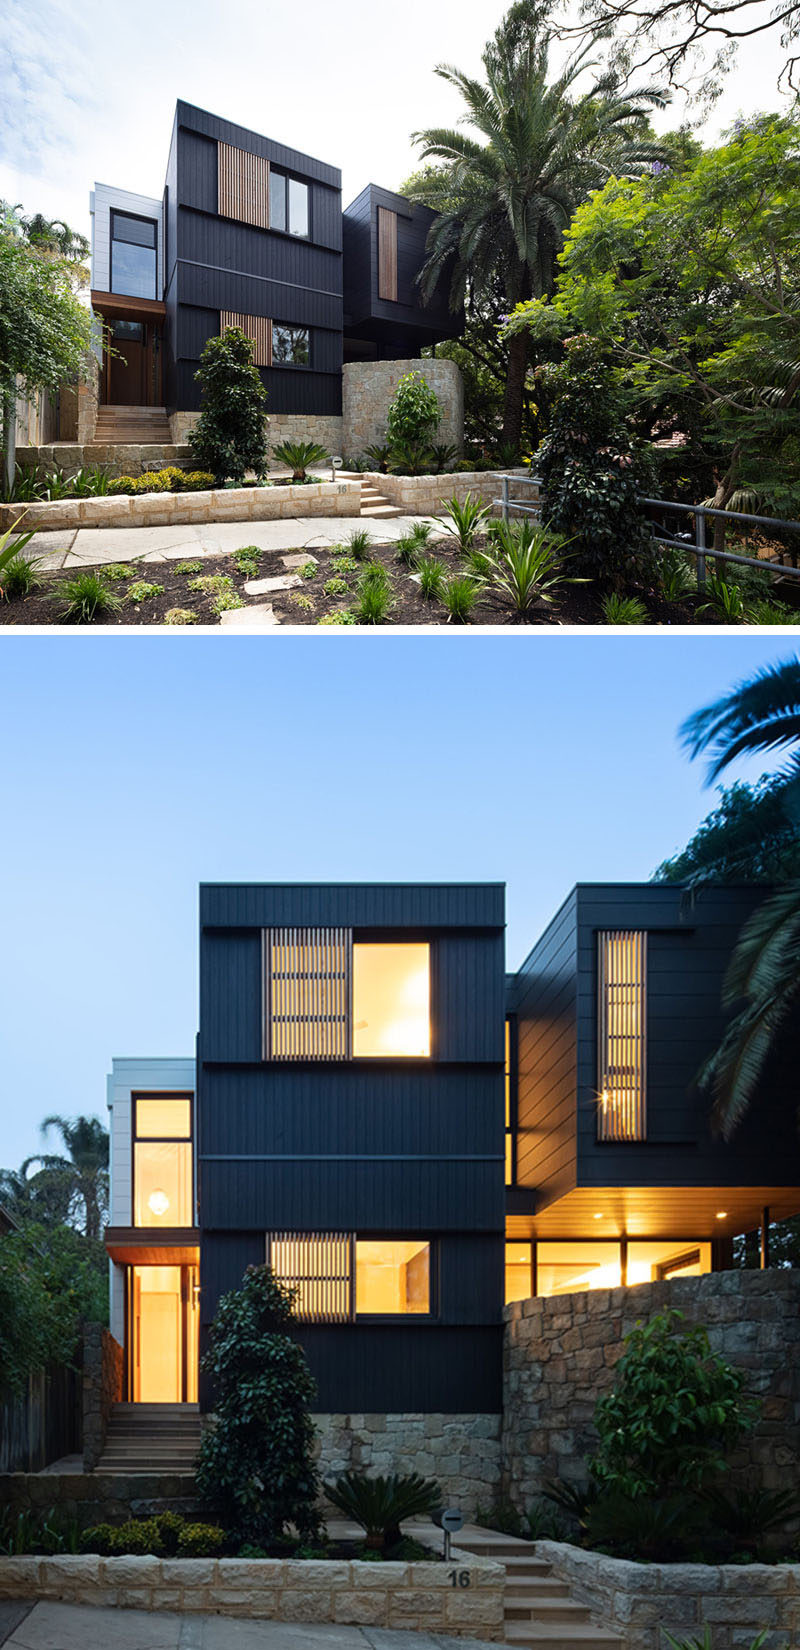 The exterior of the home is clad in Blackened Cambia Ash and Scyon Stria, while sandstone has been used to create a variety of levels in the front garden that leads to the front door of the home. #Landscaping #ModernHouse #Architecture